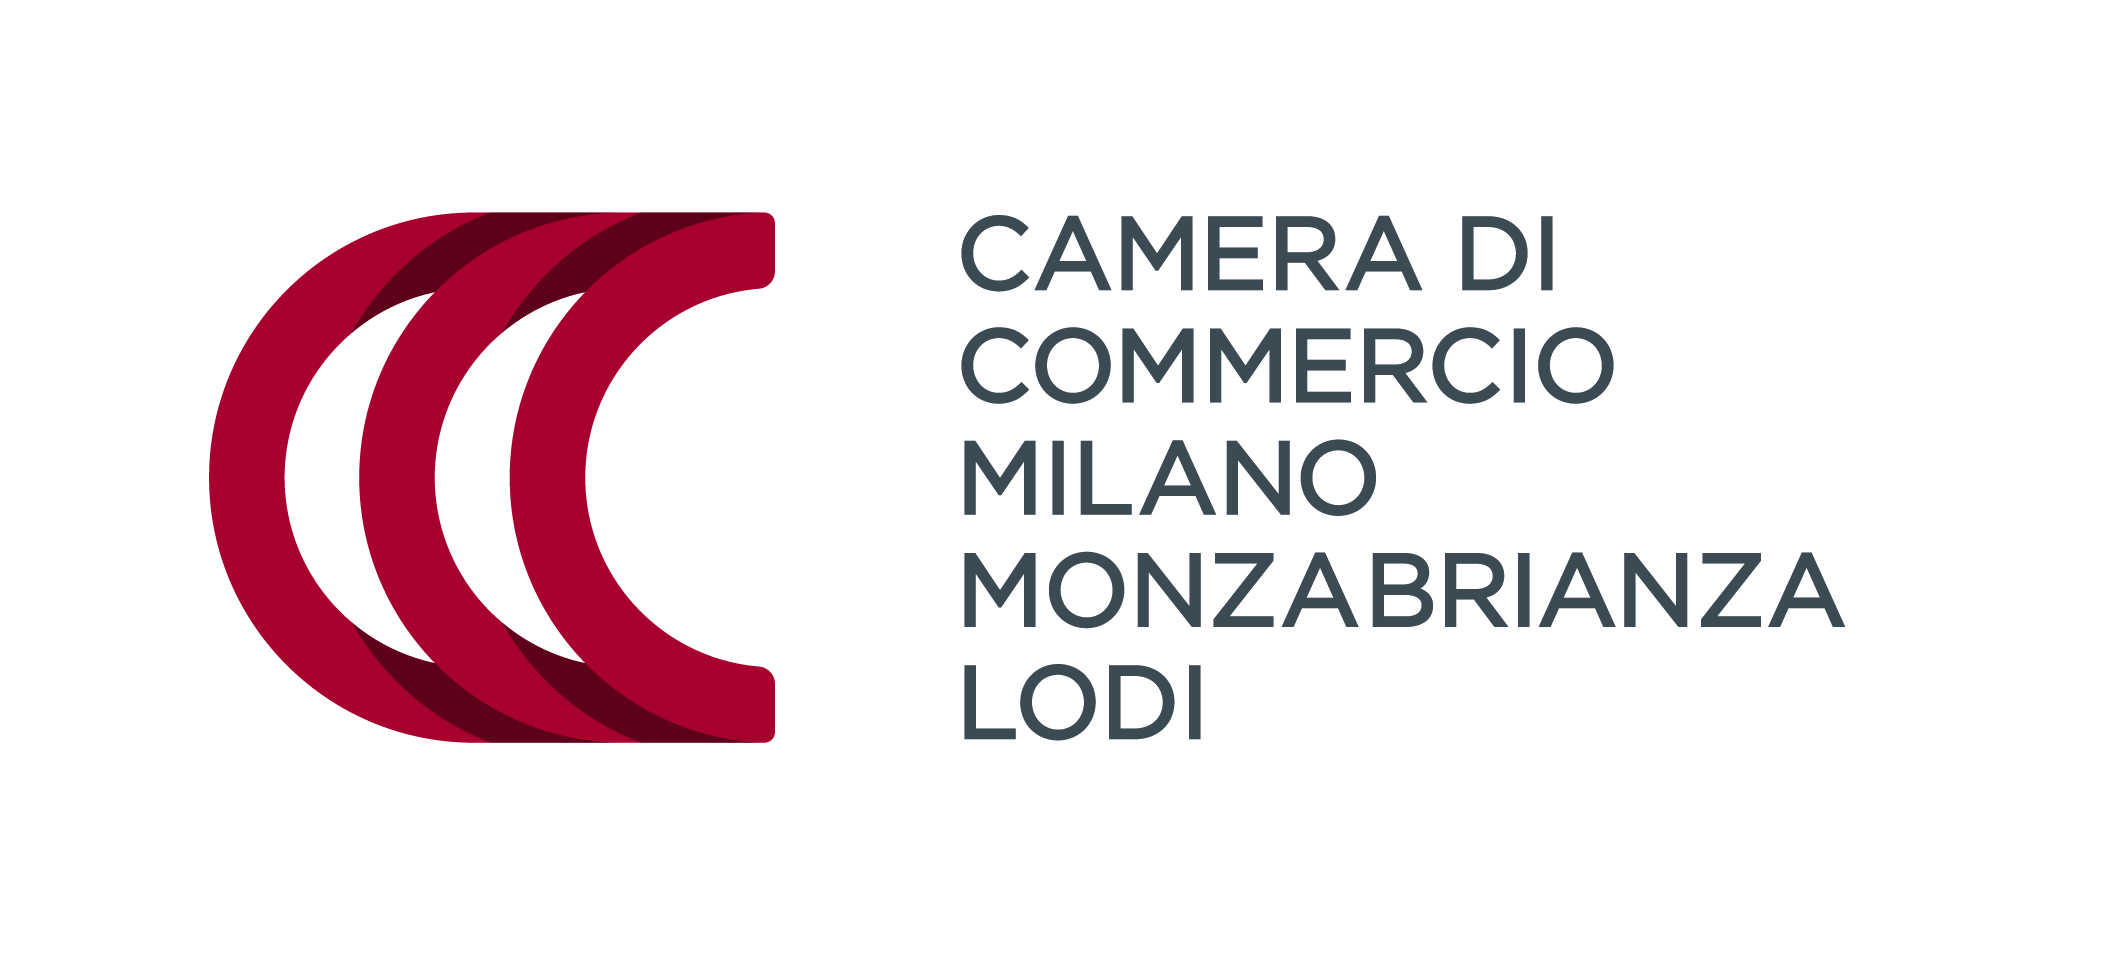 Partner - Come diventare Mobility Manager